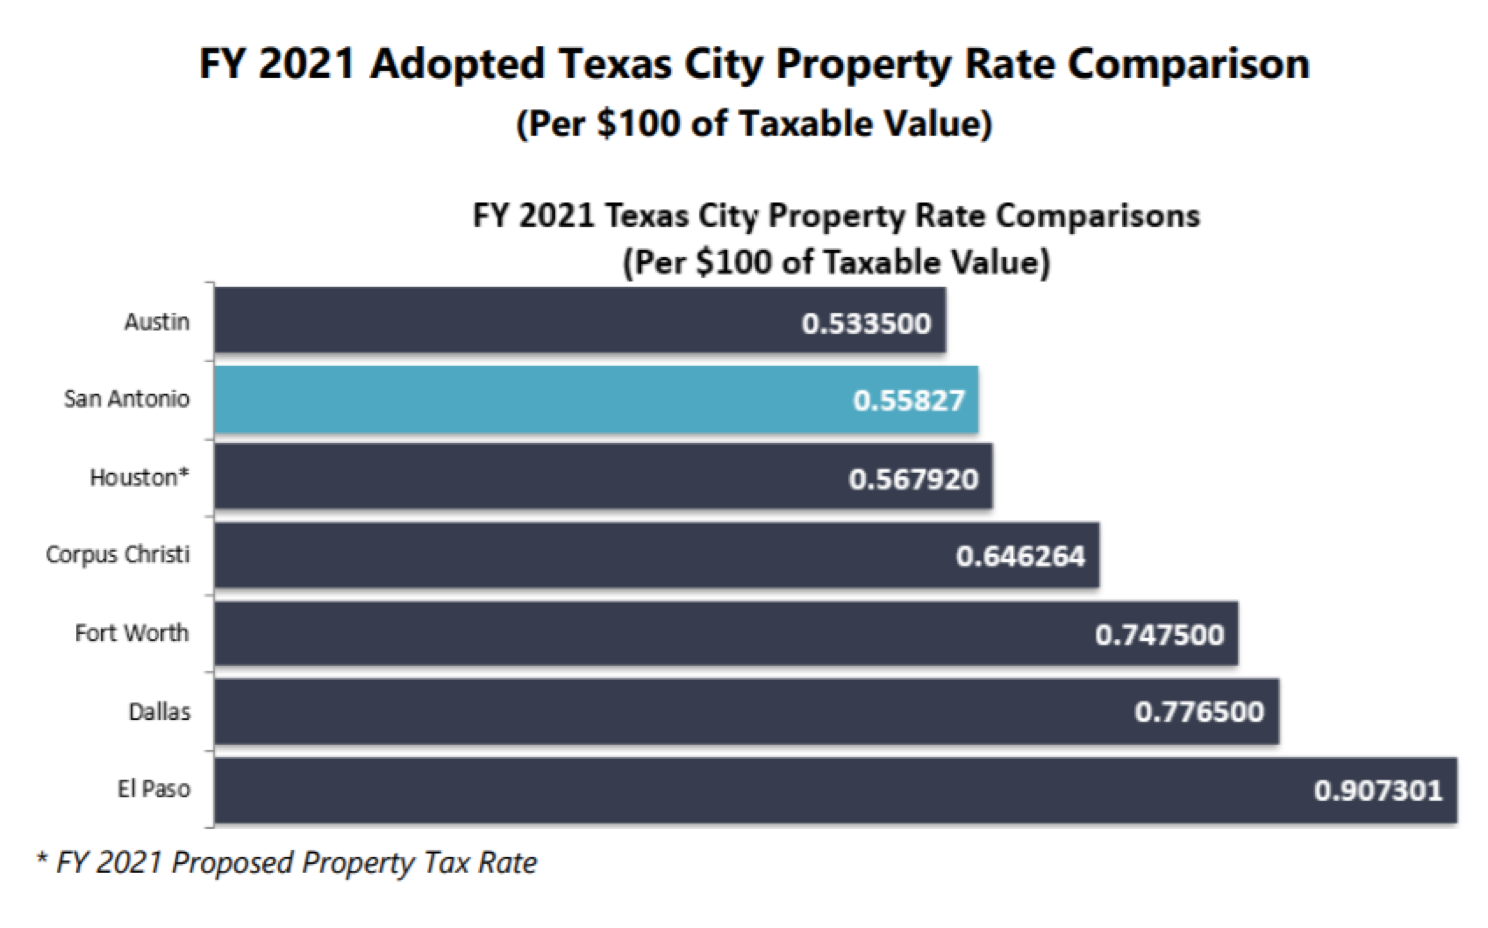 Which Texas MegaCity Has Adopted the Highest Property Tax Rate?